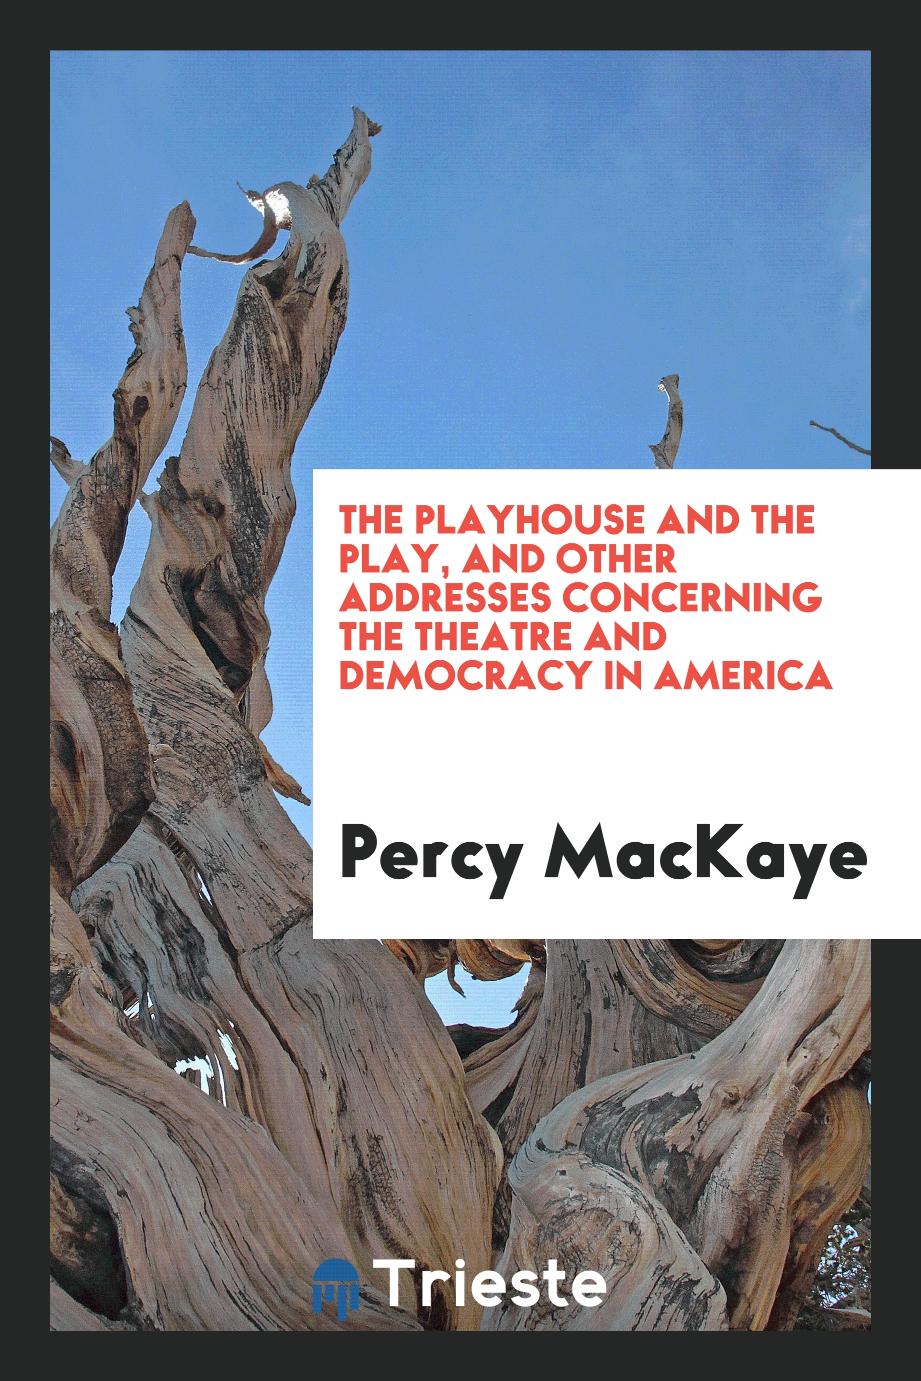 The playhouse and the play, and other addresses concerning the theatre and democracy in America